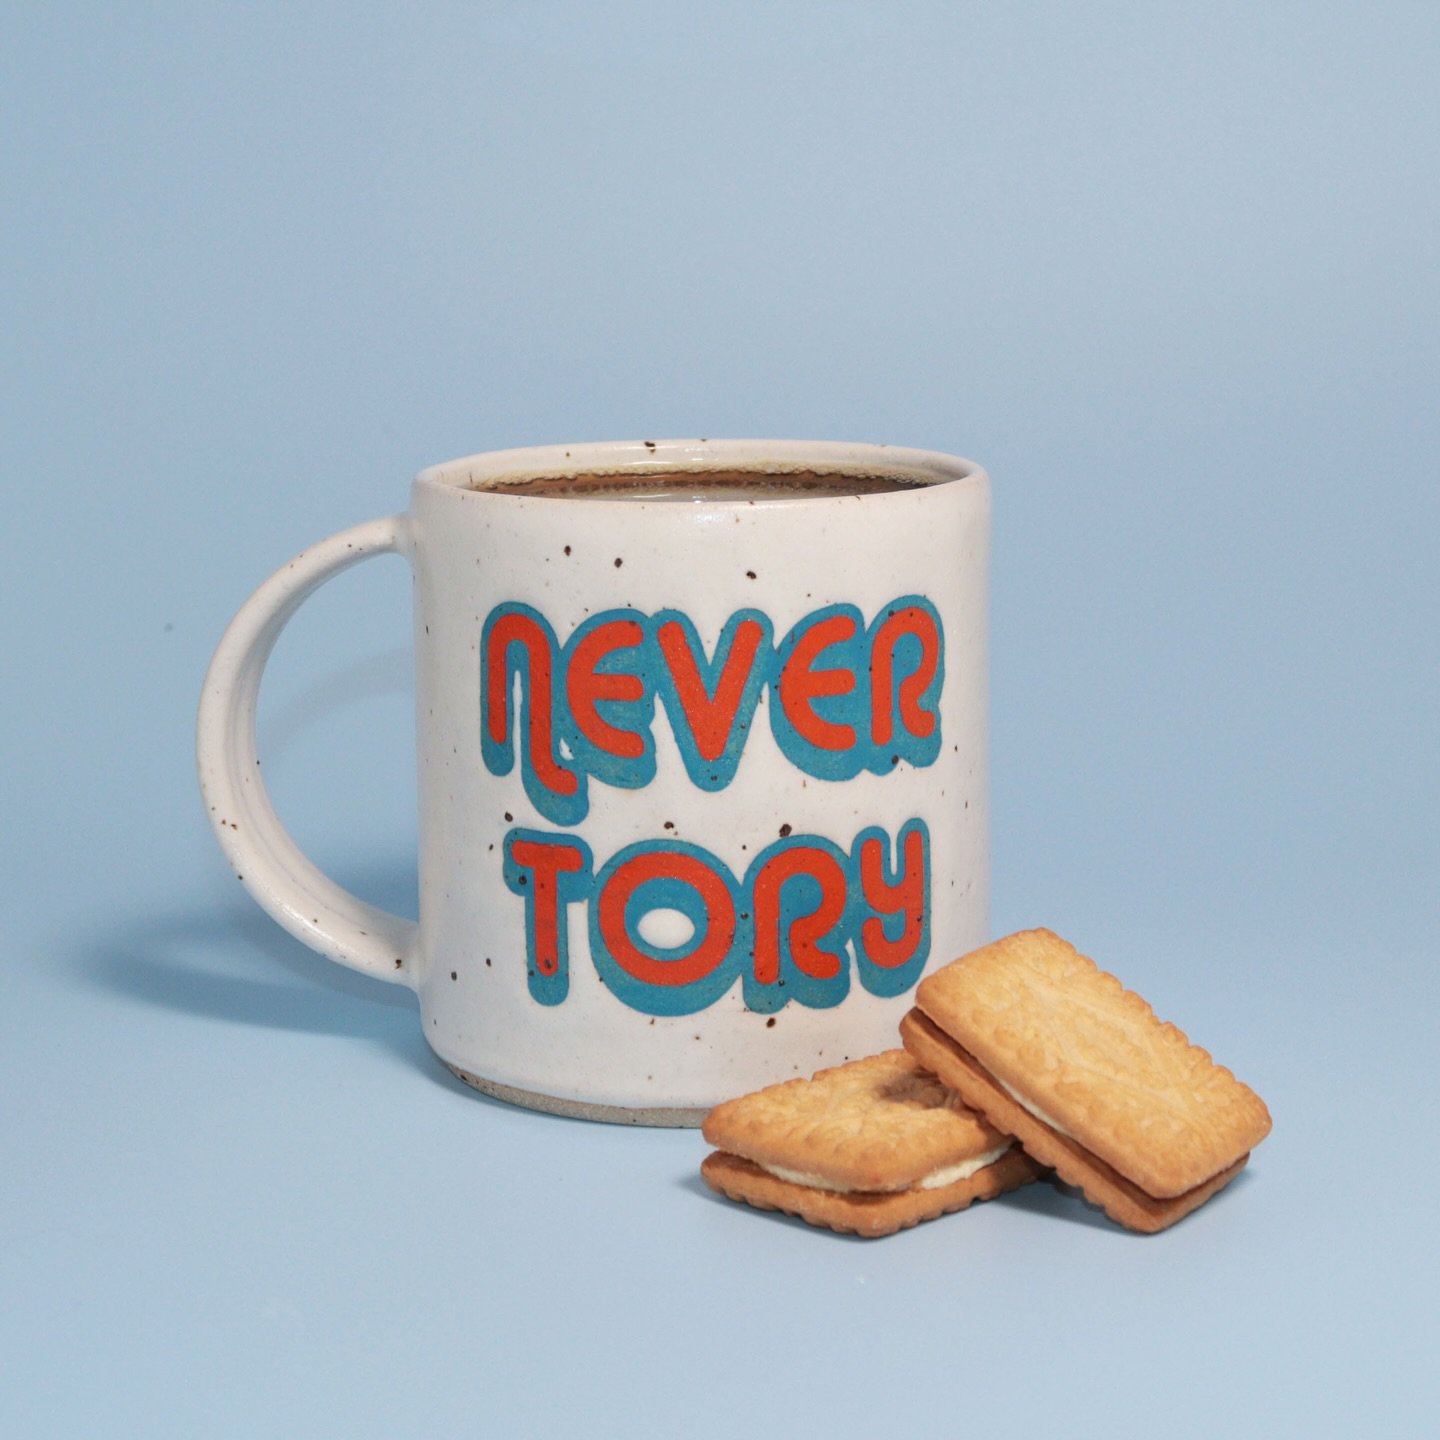 At last! A General Election has been called for 4th July - about flippin&rsquo; time! I&rsquo;ve just about recovered from the shock and have decided to offer a special edition run of my Never Tory &lsquo;Disco&rsquo; font mugs as a pre-order.

These